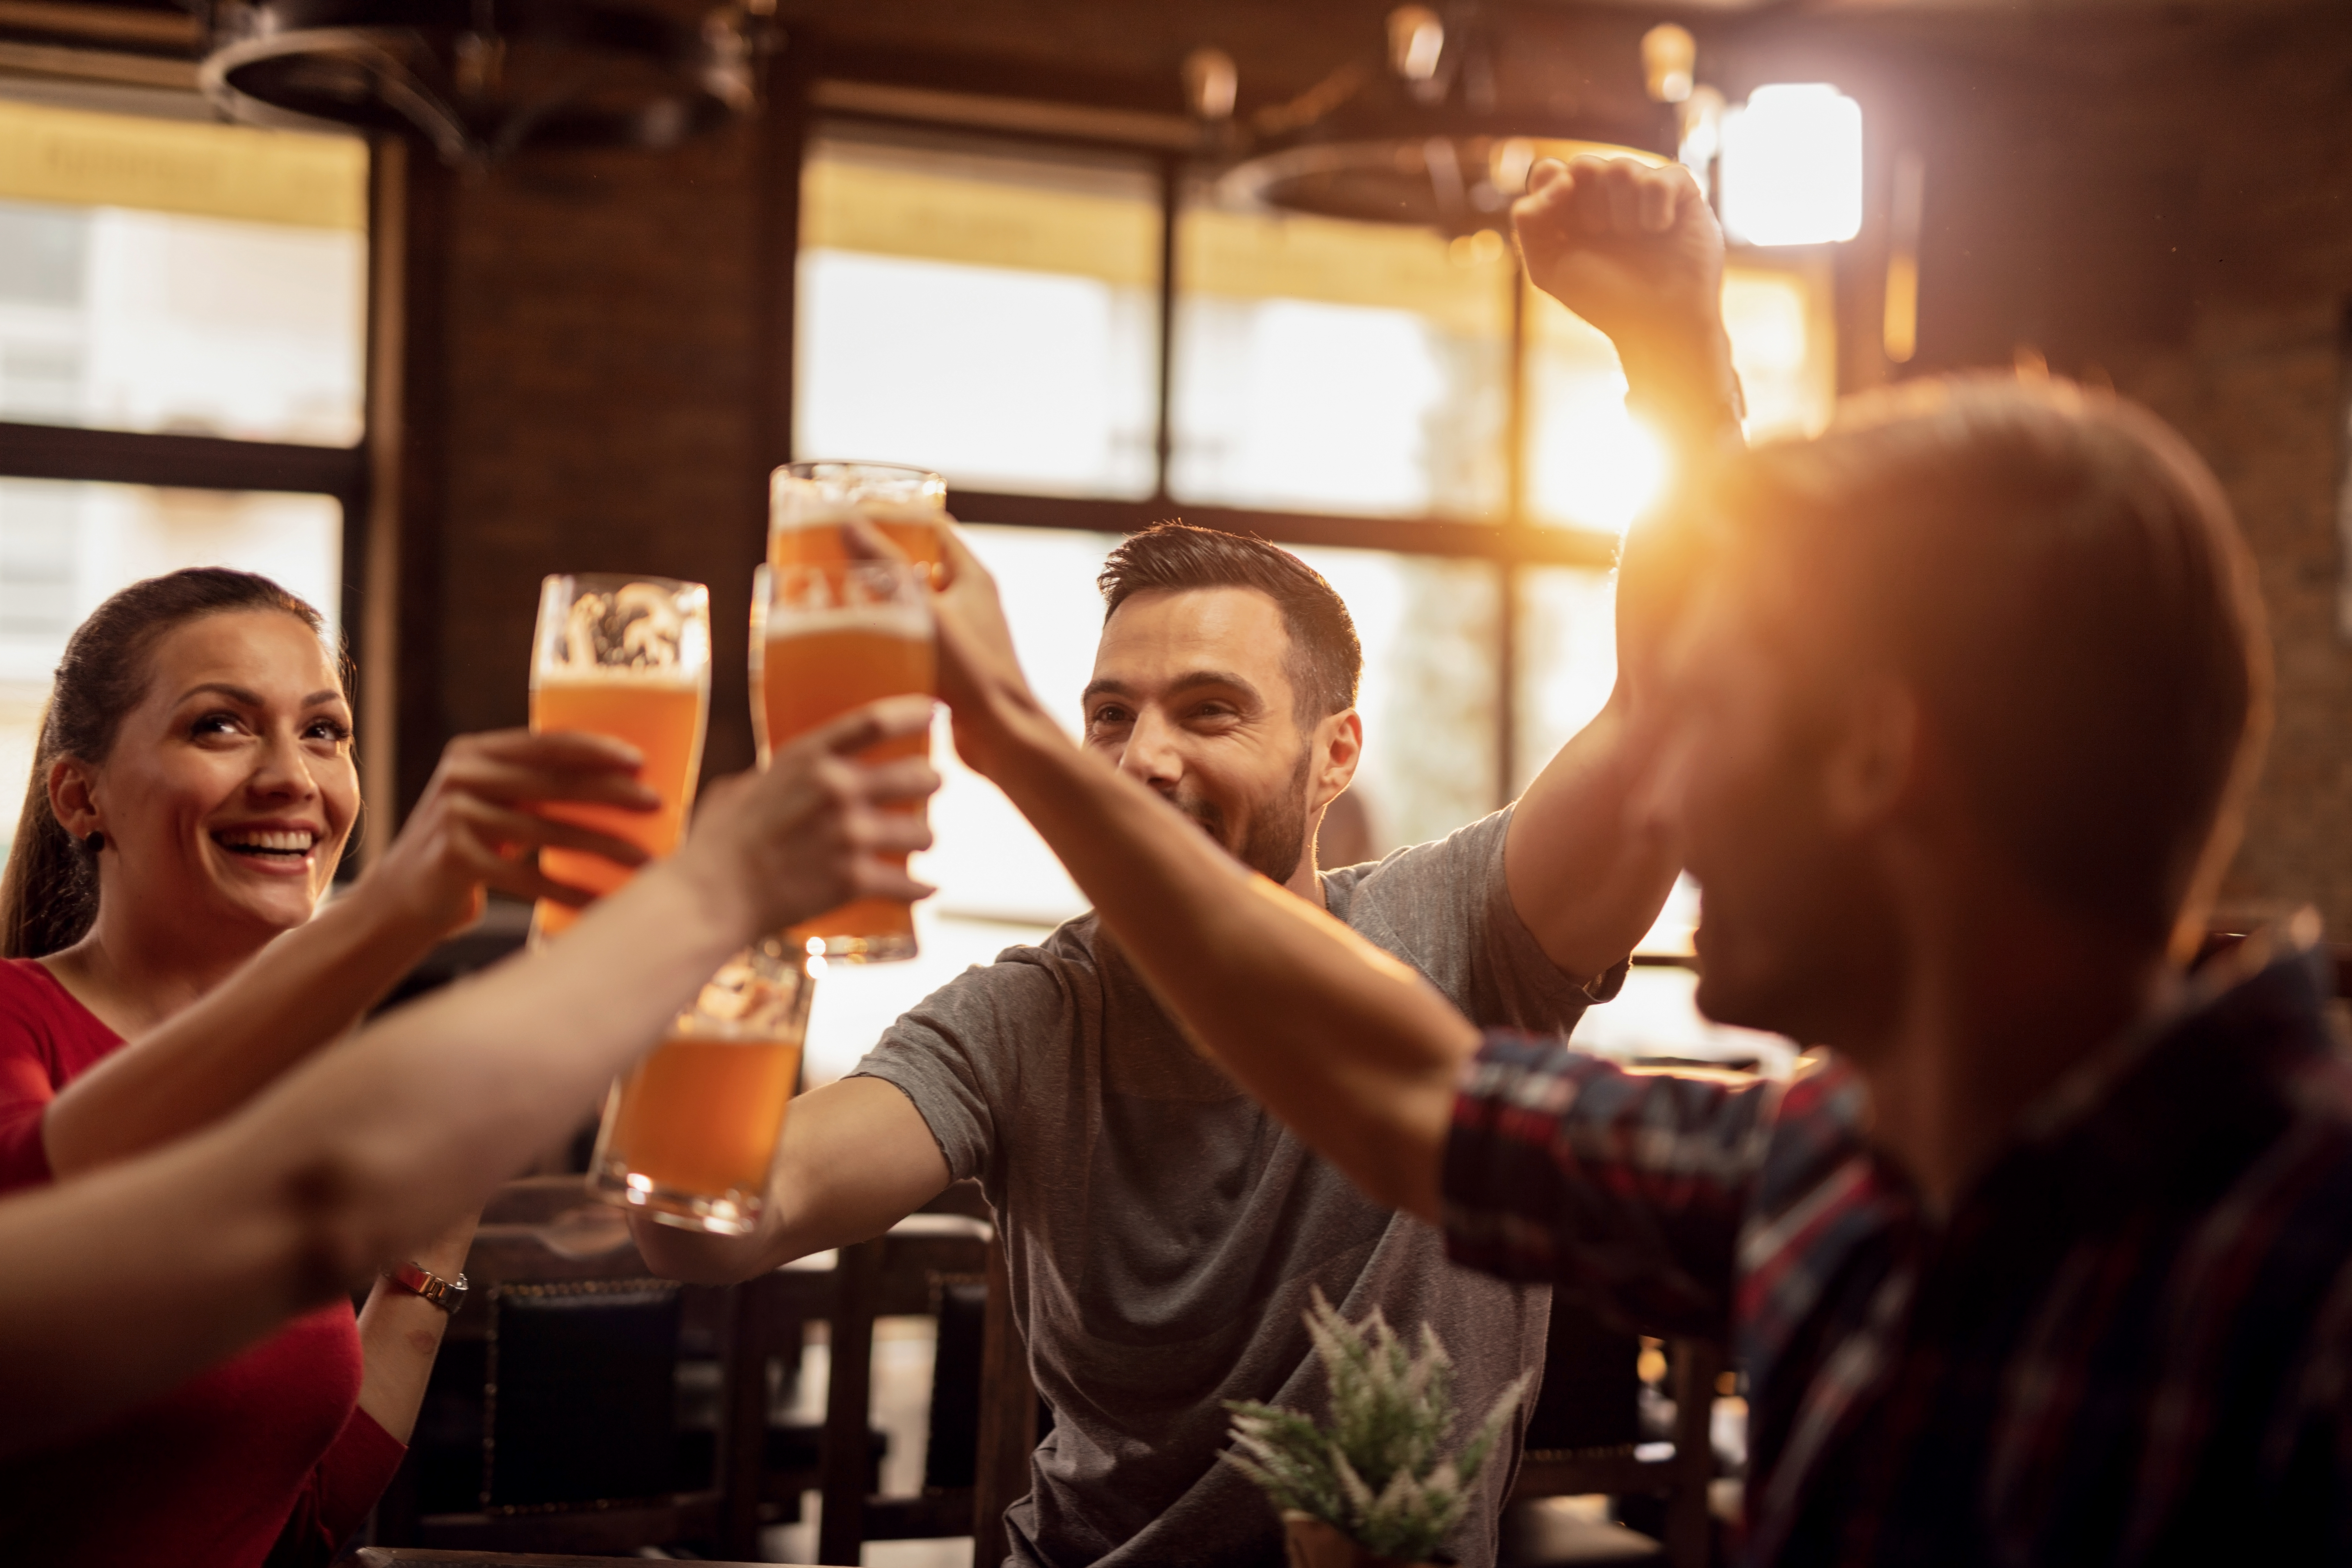 It’s your round – Pubs in the UK